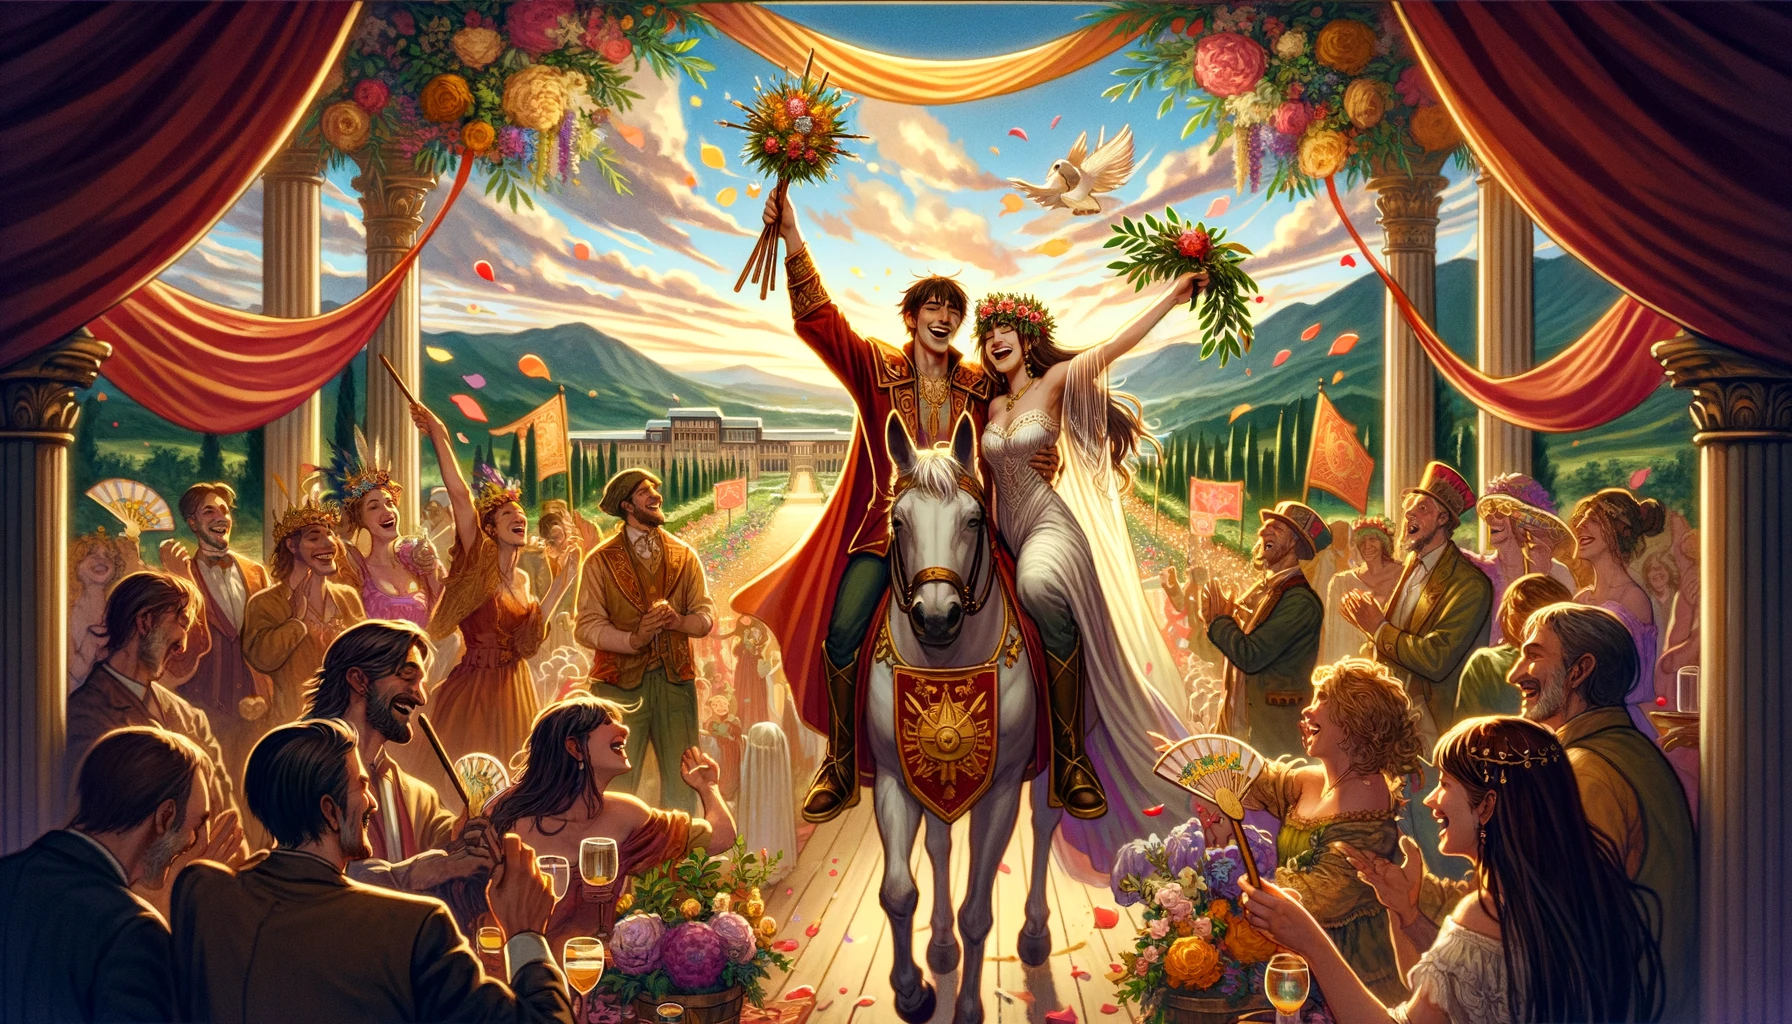 An illustration portraying themes of victory, recognition, and the celebration of love's triumphs. The image features a joyful couple being celebrated and cheered by their supportive community, symbolizing the success and acknowledgment of their relationship. Set against a backdrop evoking joy, fulfillment, and a bright future, it captures the essence of love's triumphs and communal support.